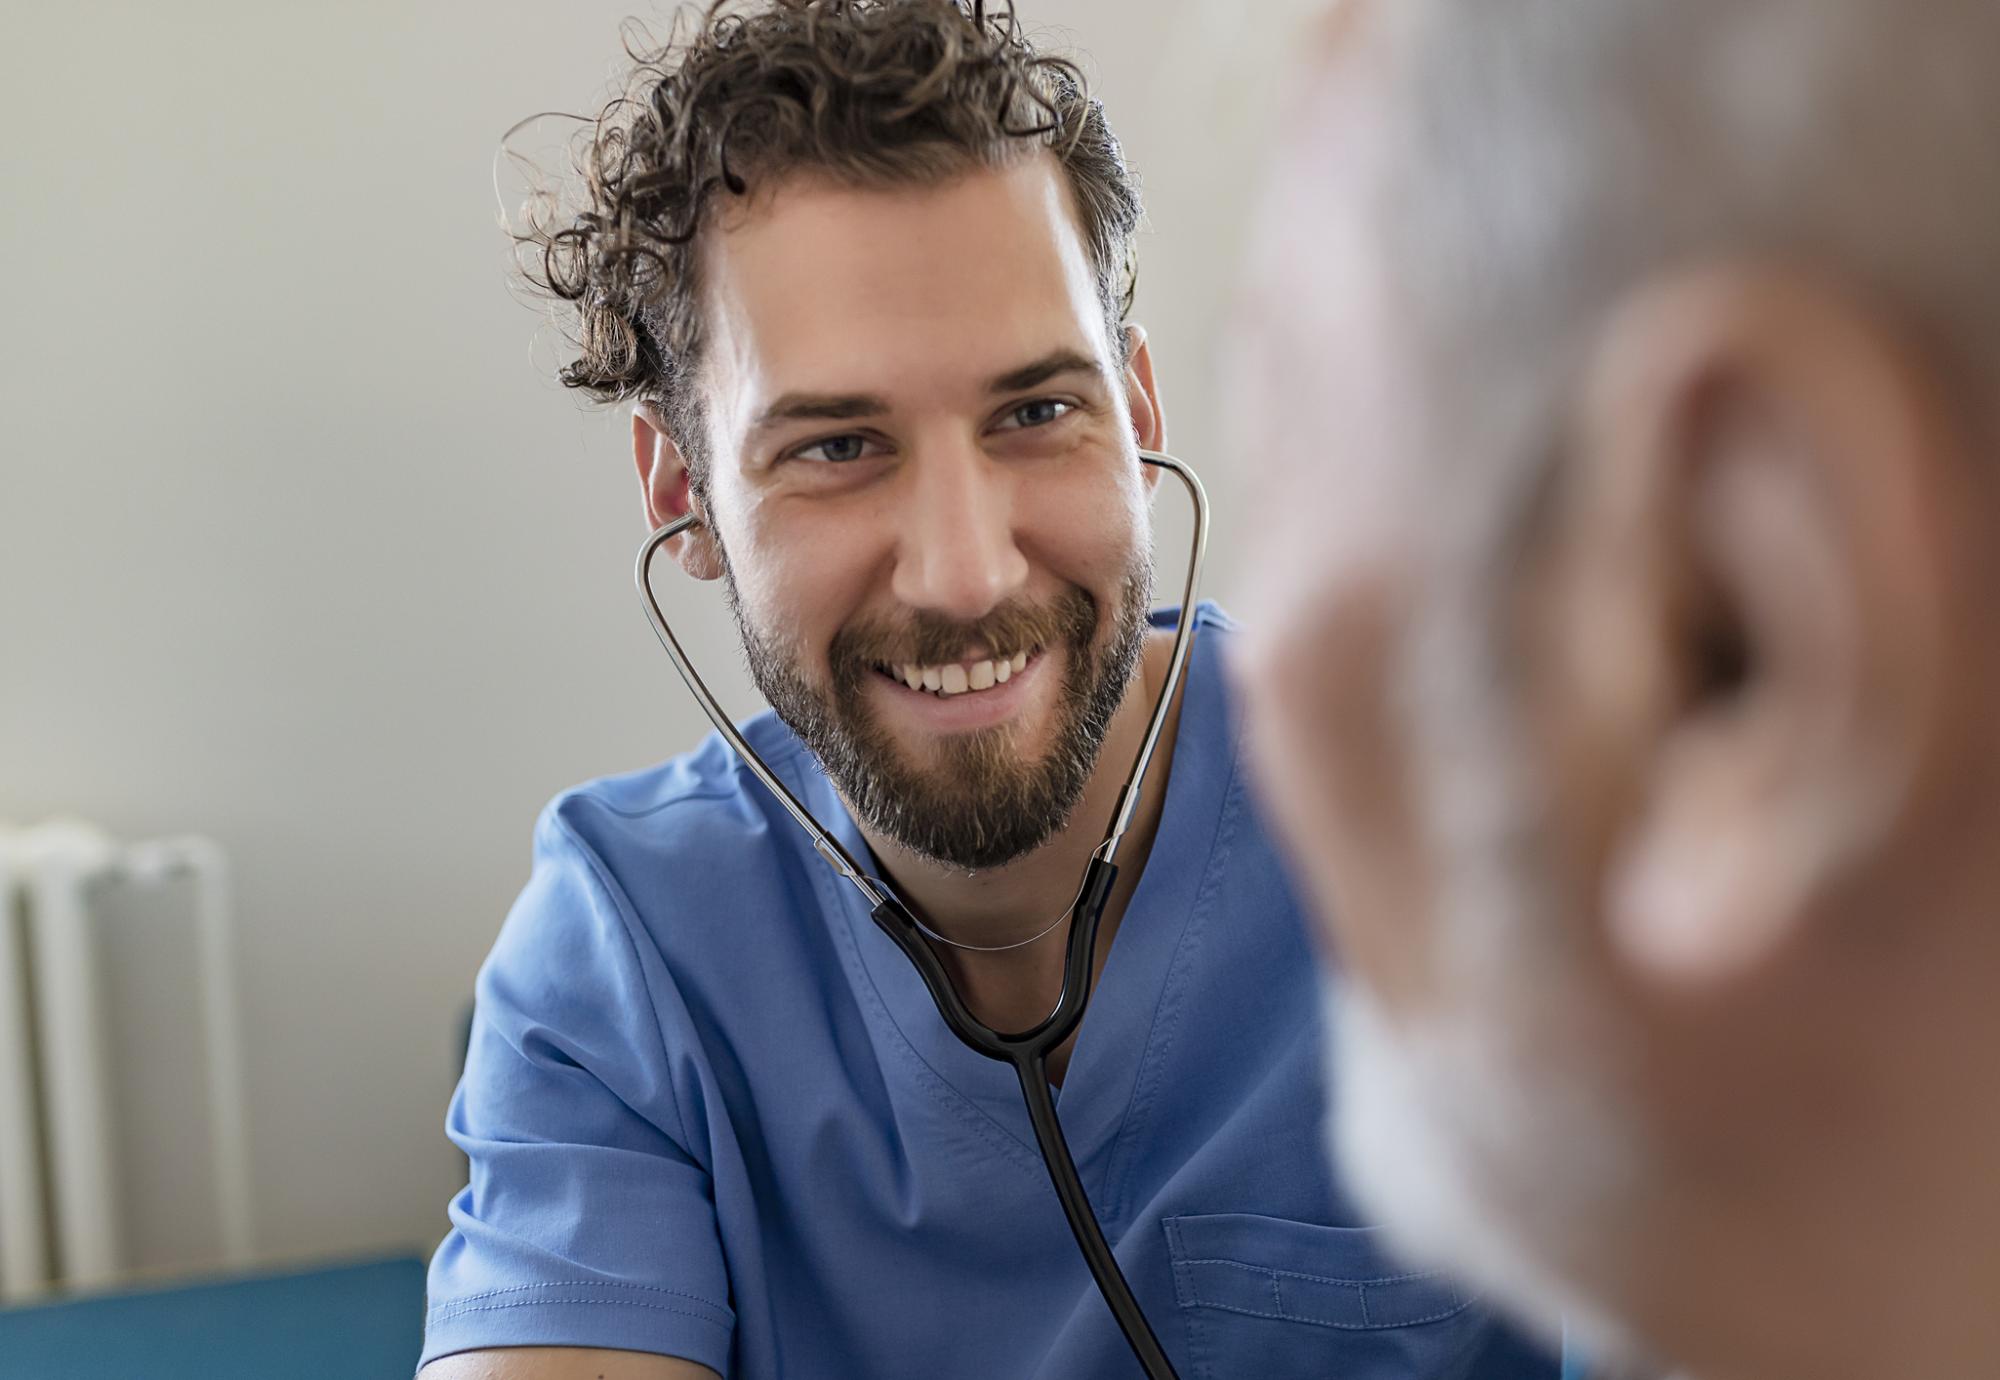 Male health professional listening to patient with stethoscope